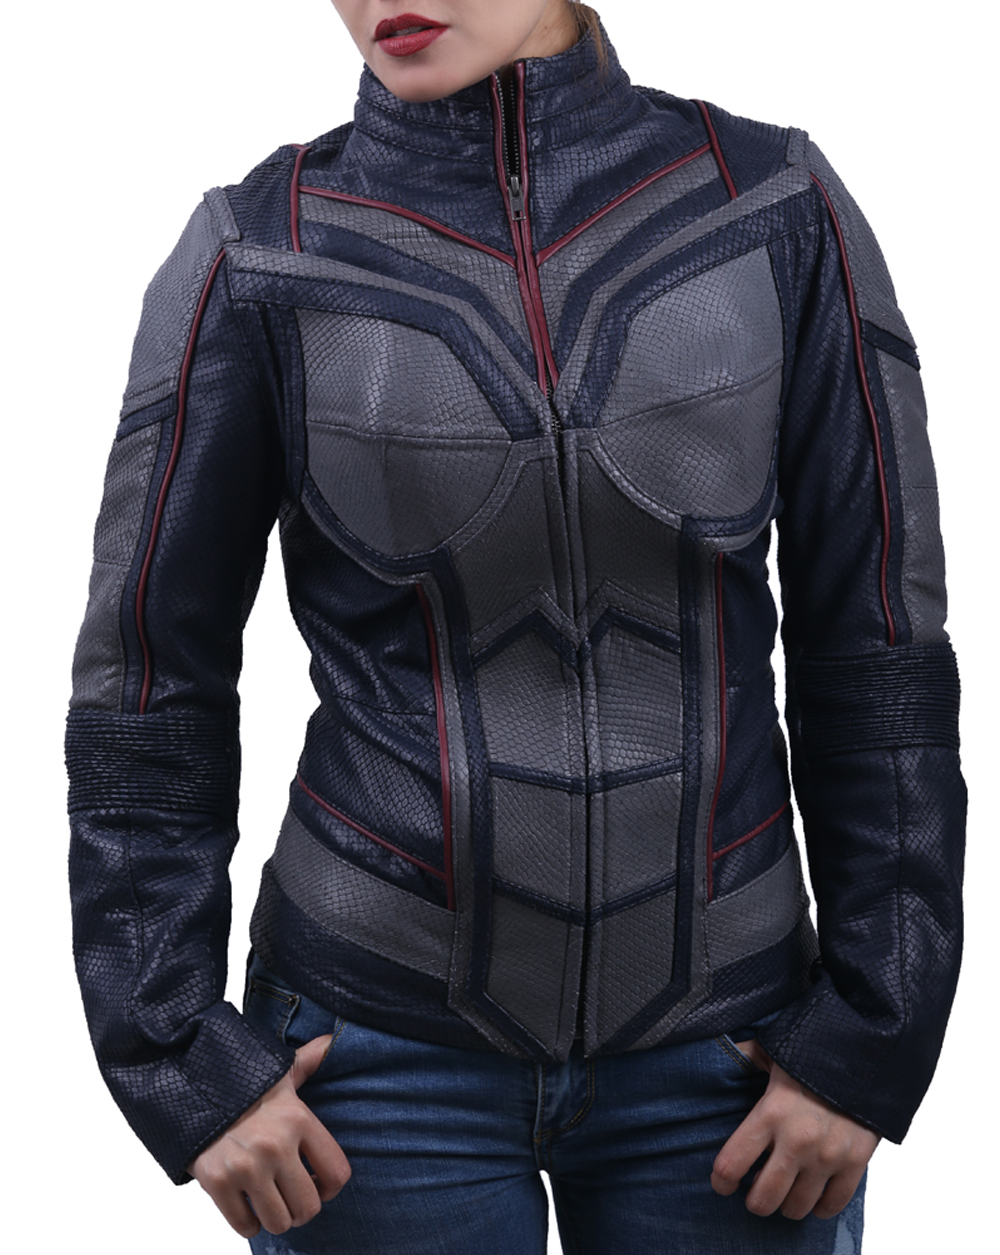 Ant-Woman ant woman jacket